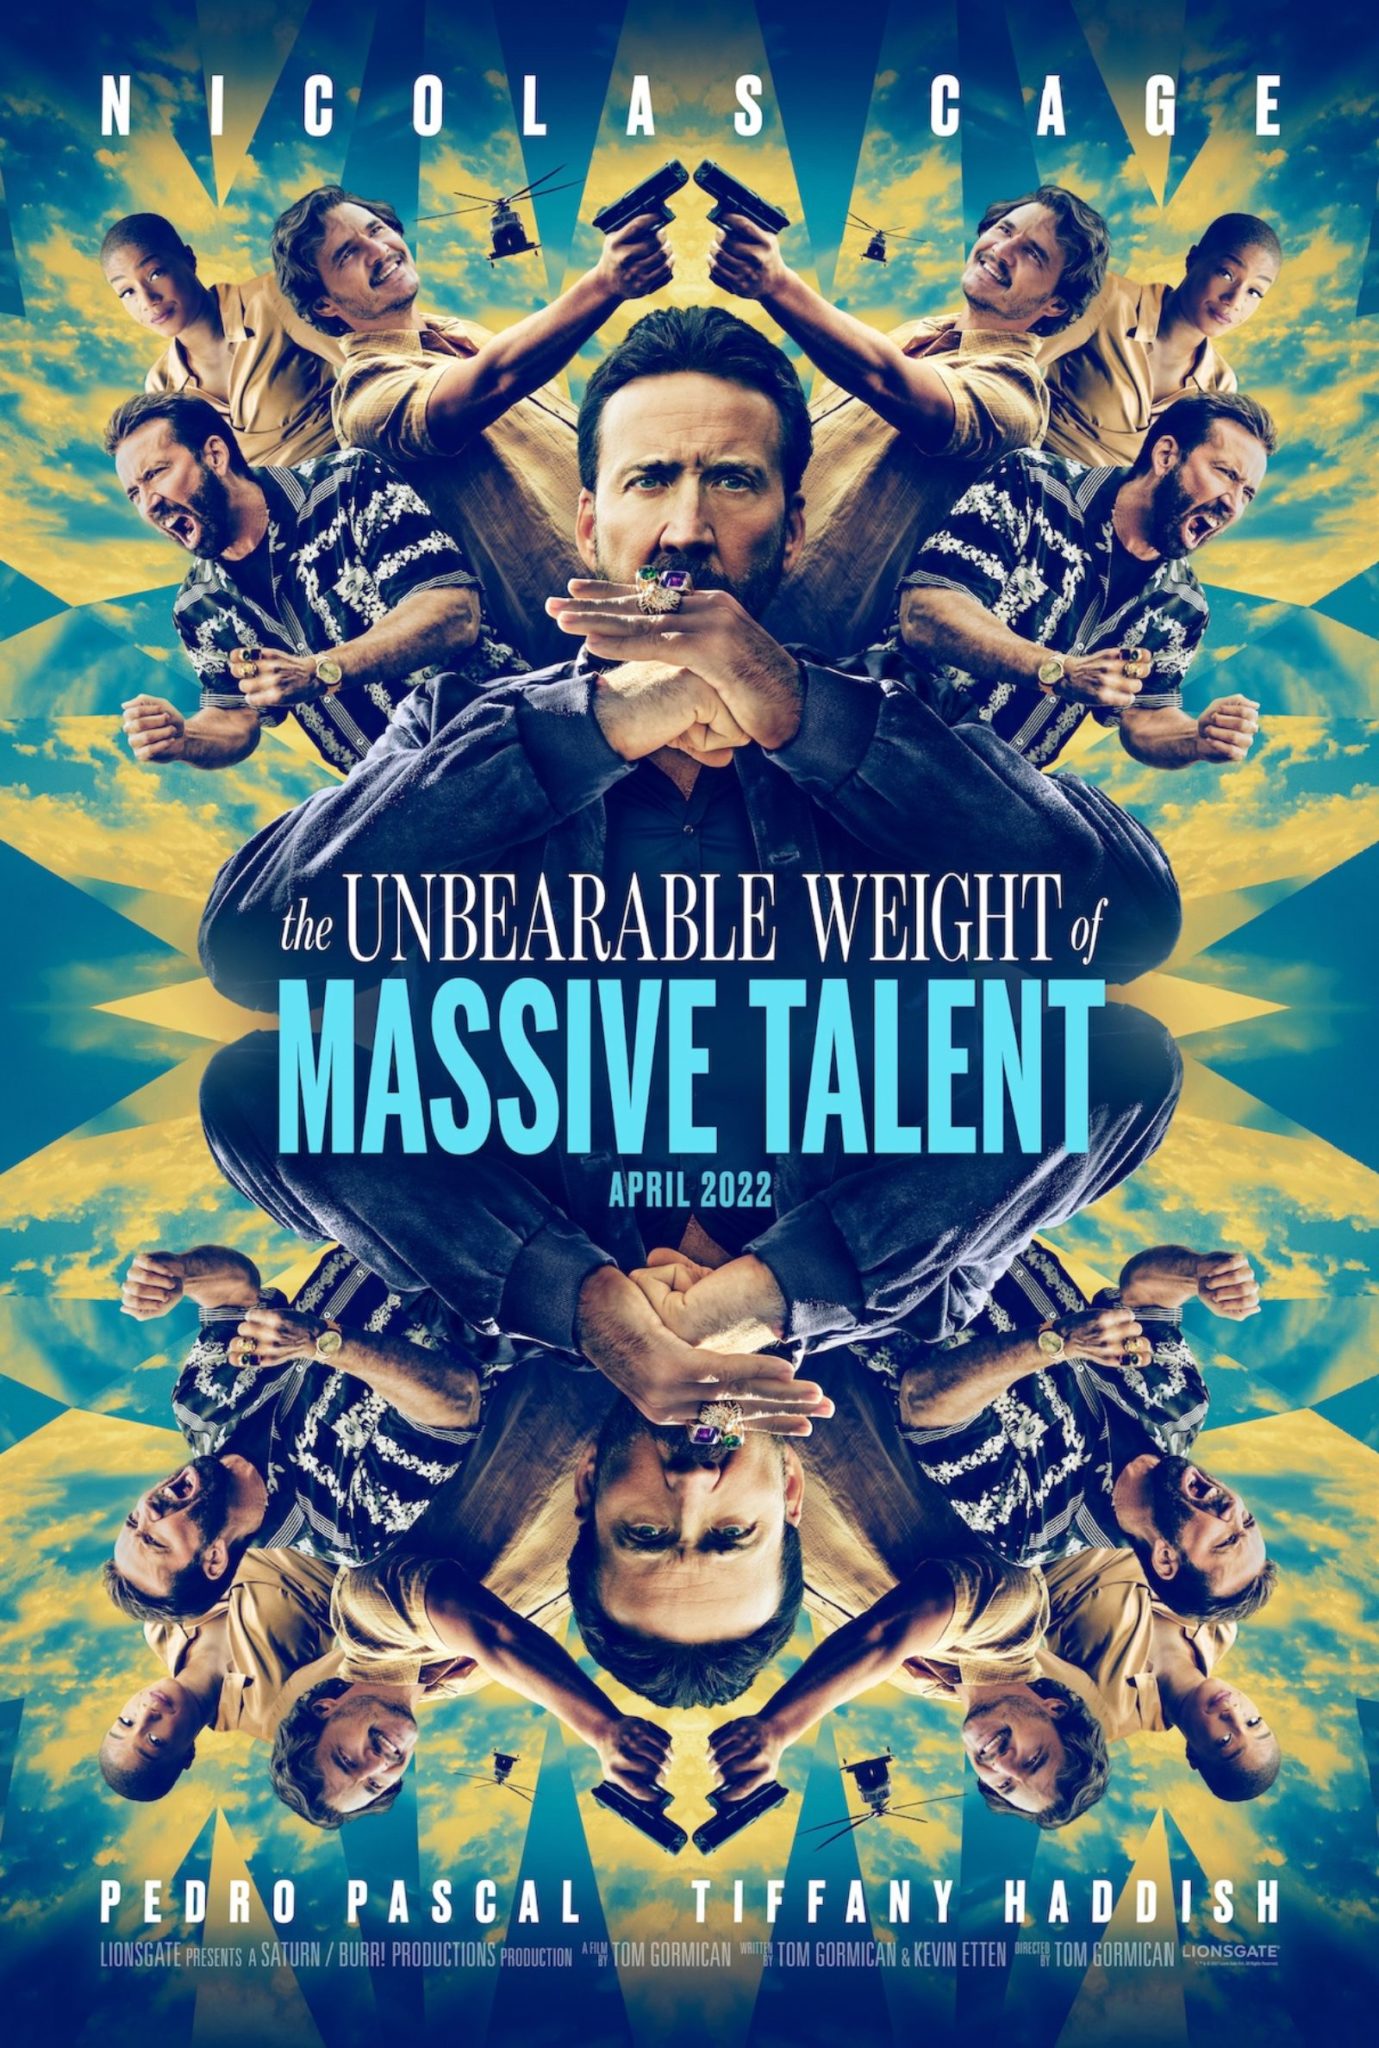 Nicolas Cage Gets Meta In First Trailer For The Unbearable Weight Of Massive Talent